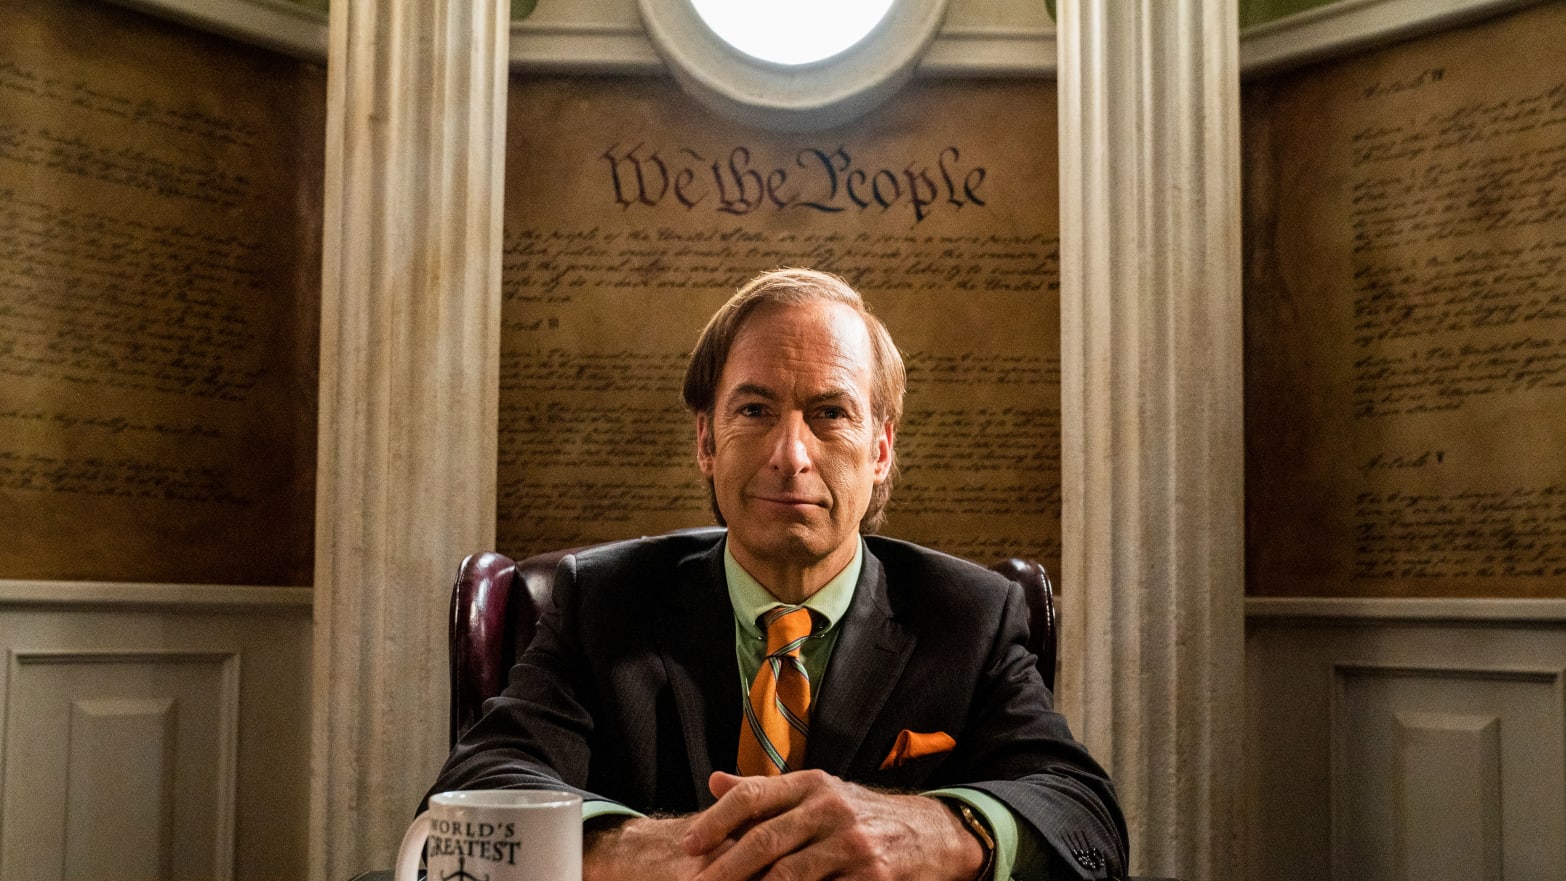 The Most Shocking ‘Better Call Saul’ Episode Yet. How Was That Not the